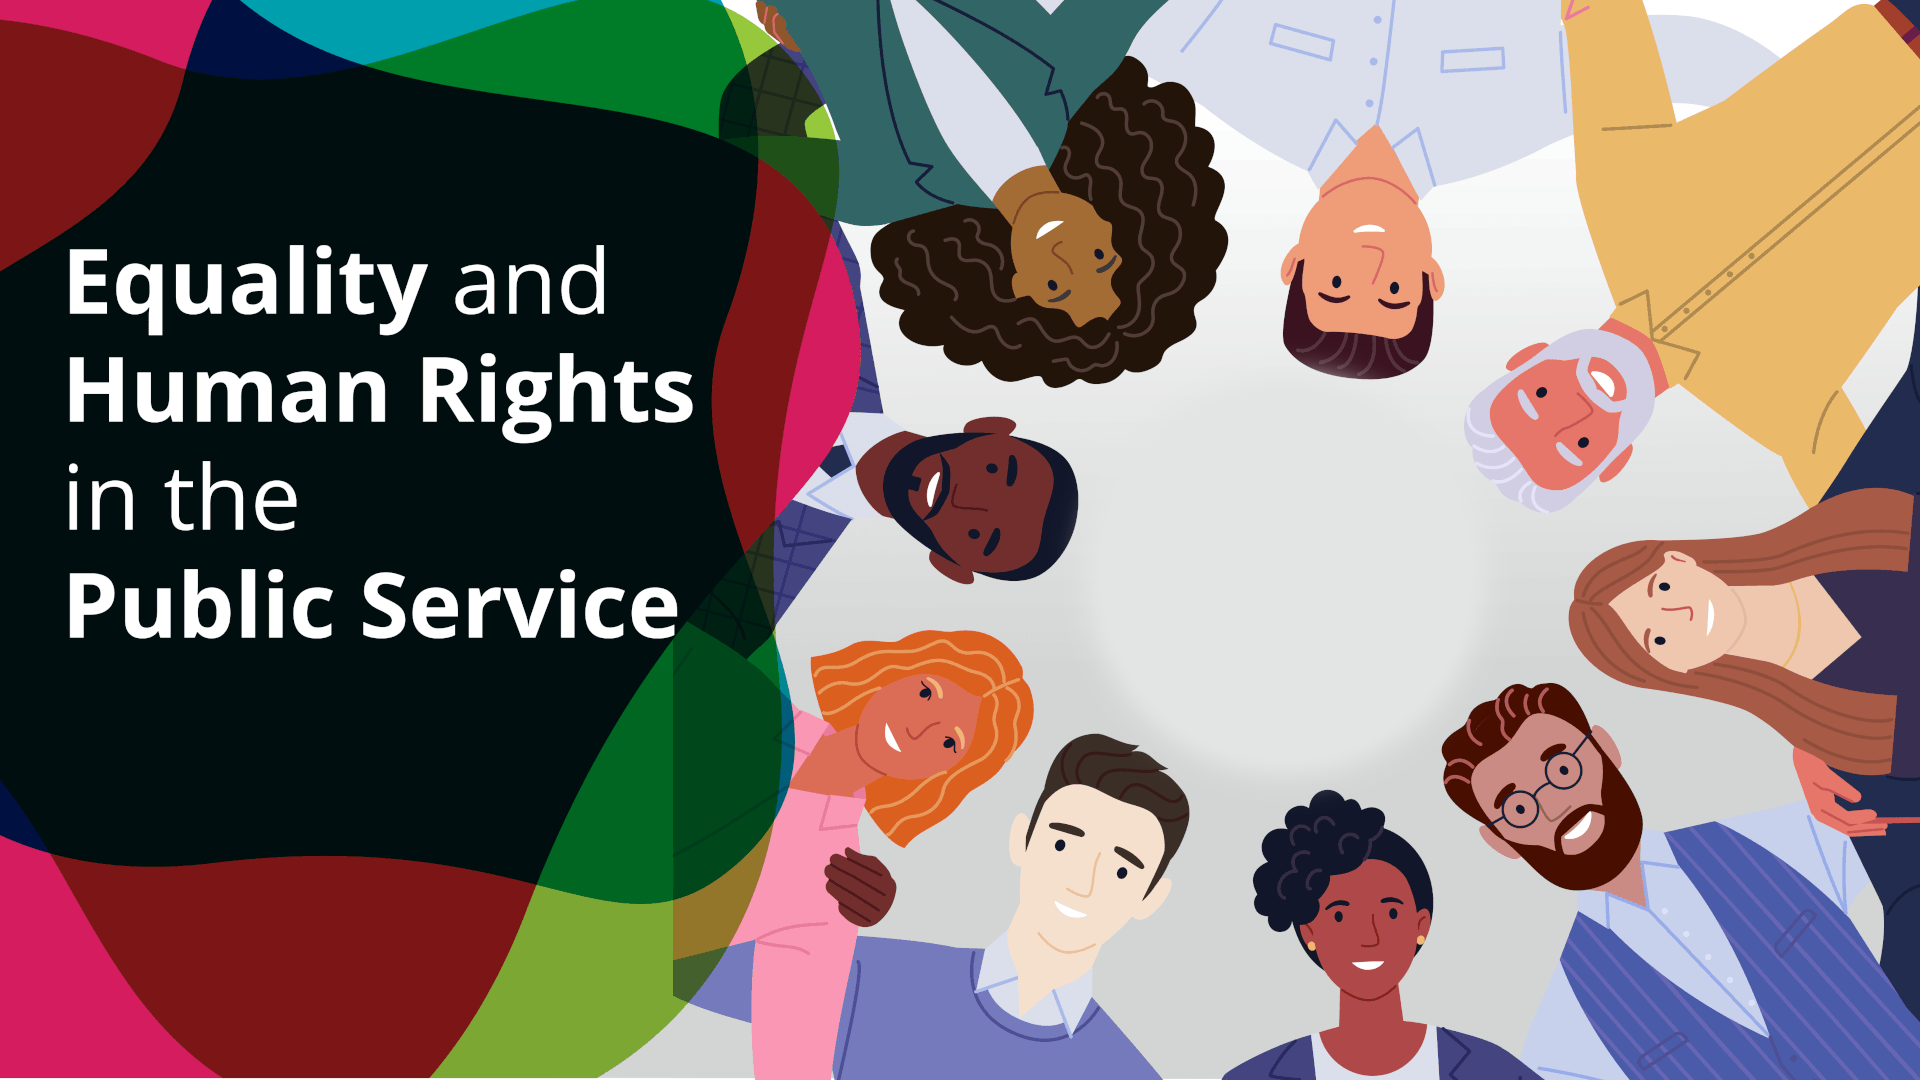 Equality and Human Rights in the Public Service